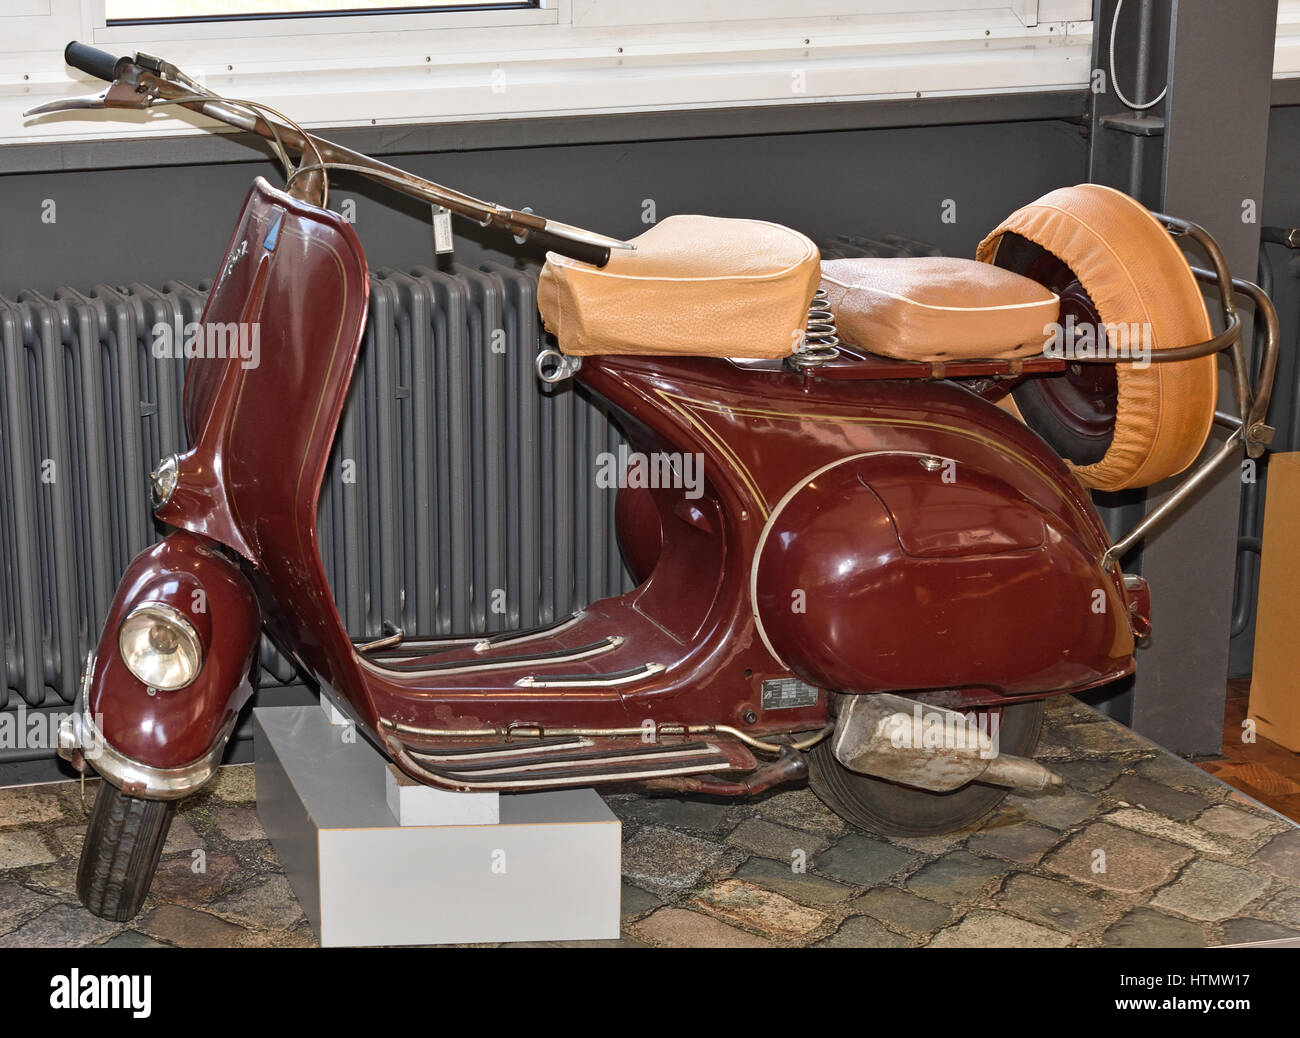 Vespa 125 Hoffmann Baujahr 1950 Scooter  Museum of Technology (The Deutsches Technikmuseum, scientific and technical collection. ) Germany  Berlin Kreuzberg Jakob Oswald Hoffmann, Germany Stock Photo